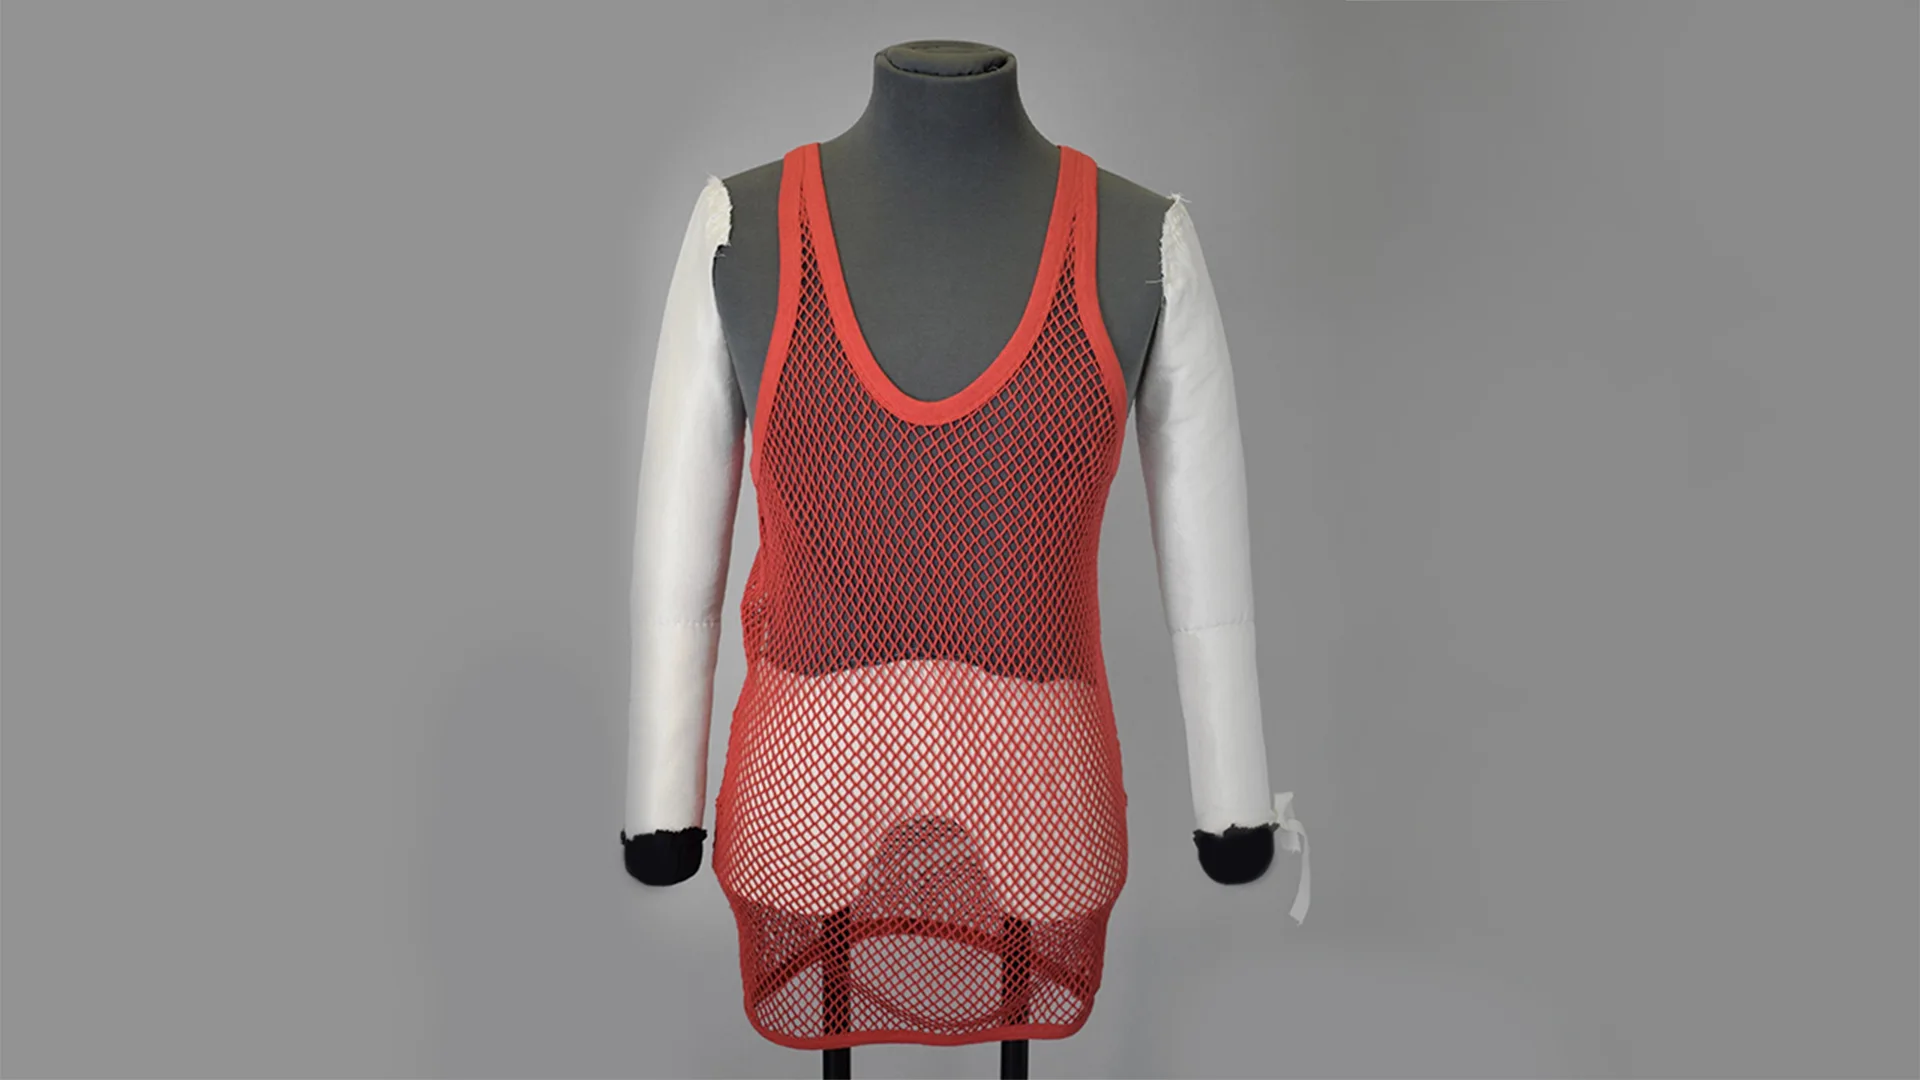 A string vest sometimes also know as a marina